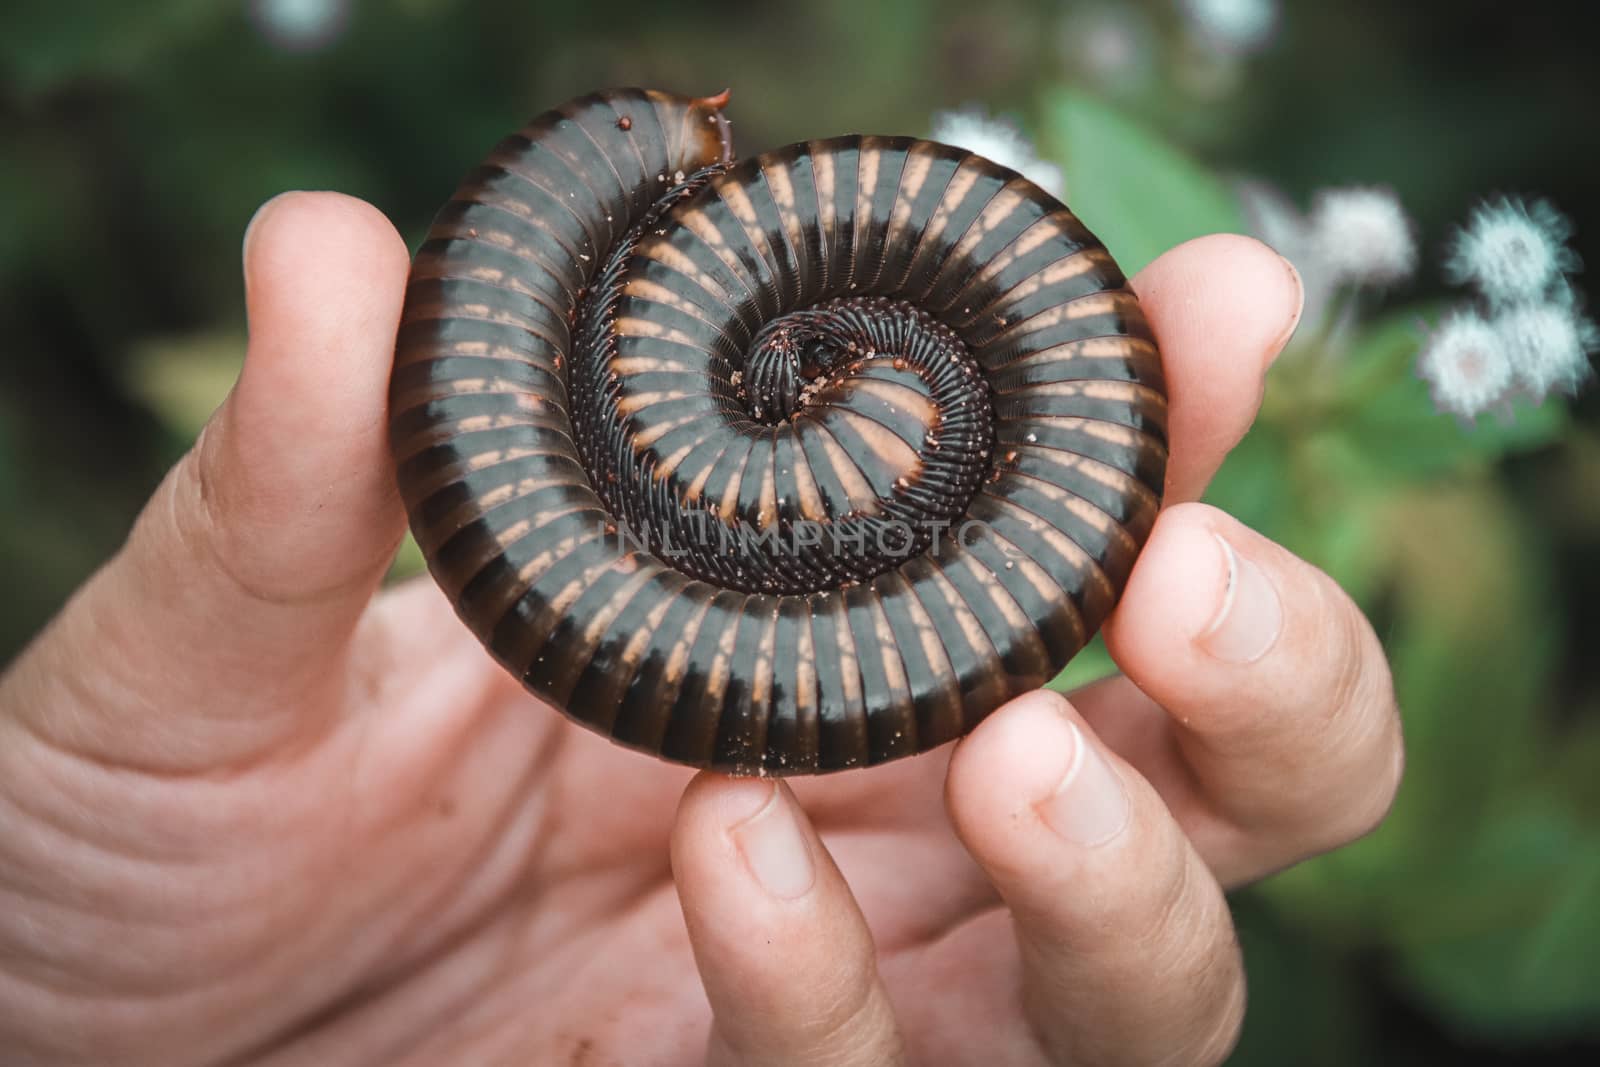 Holding a Asian giant millipede or Thyropygus spirobolinae sp, showing concept of kindness, harmony with nature and environmentalism